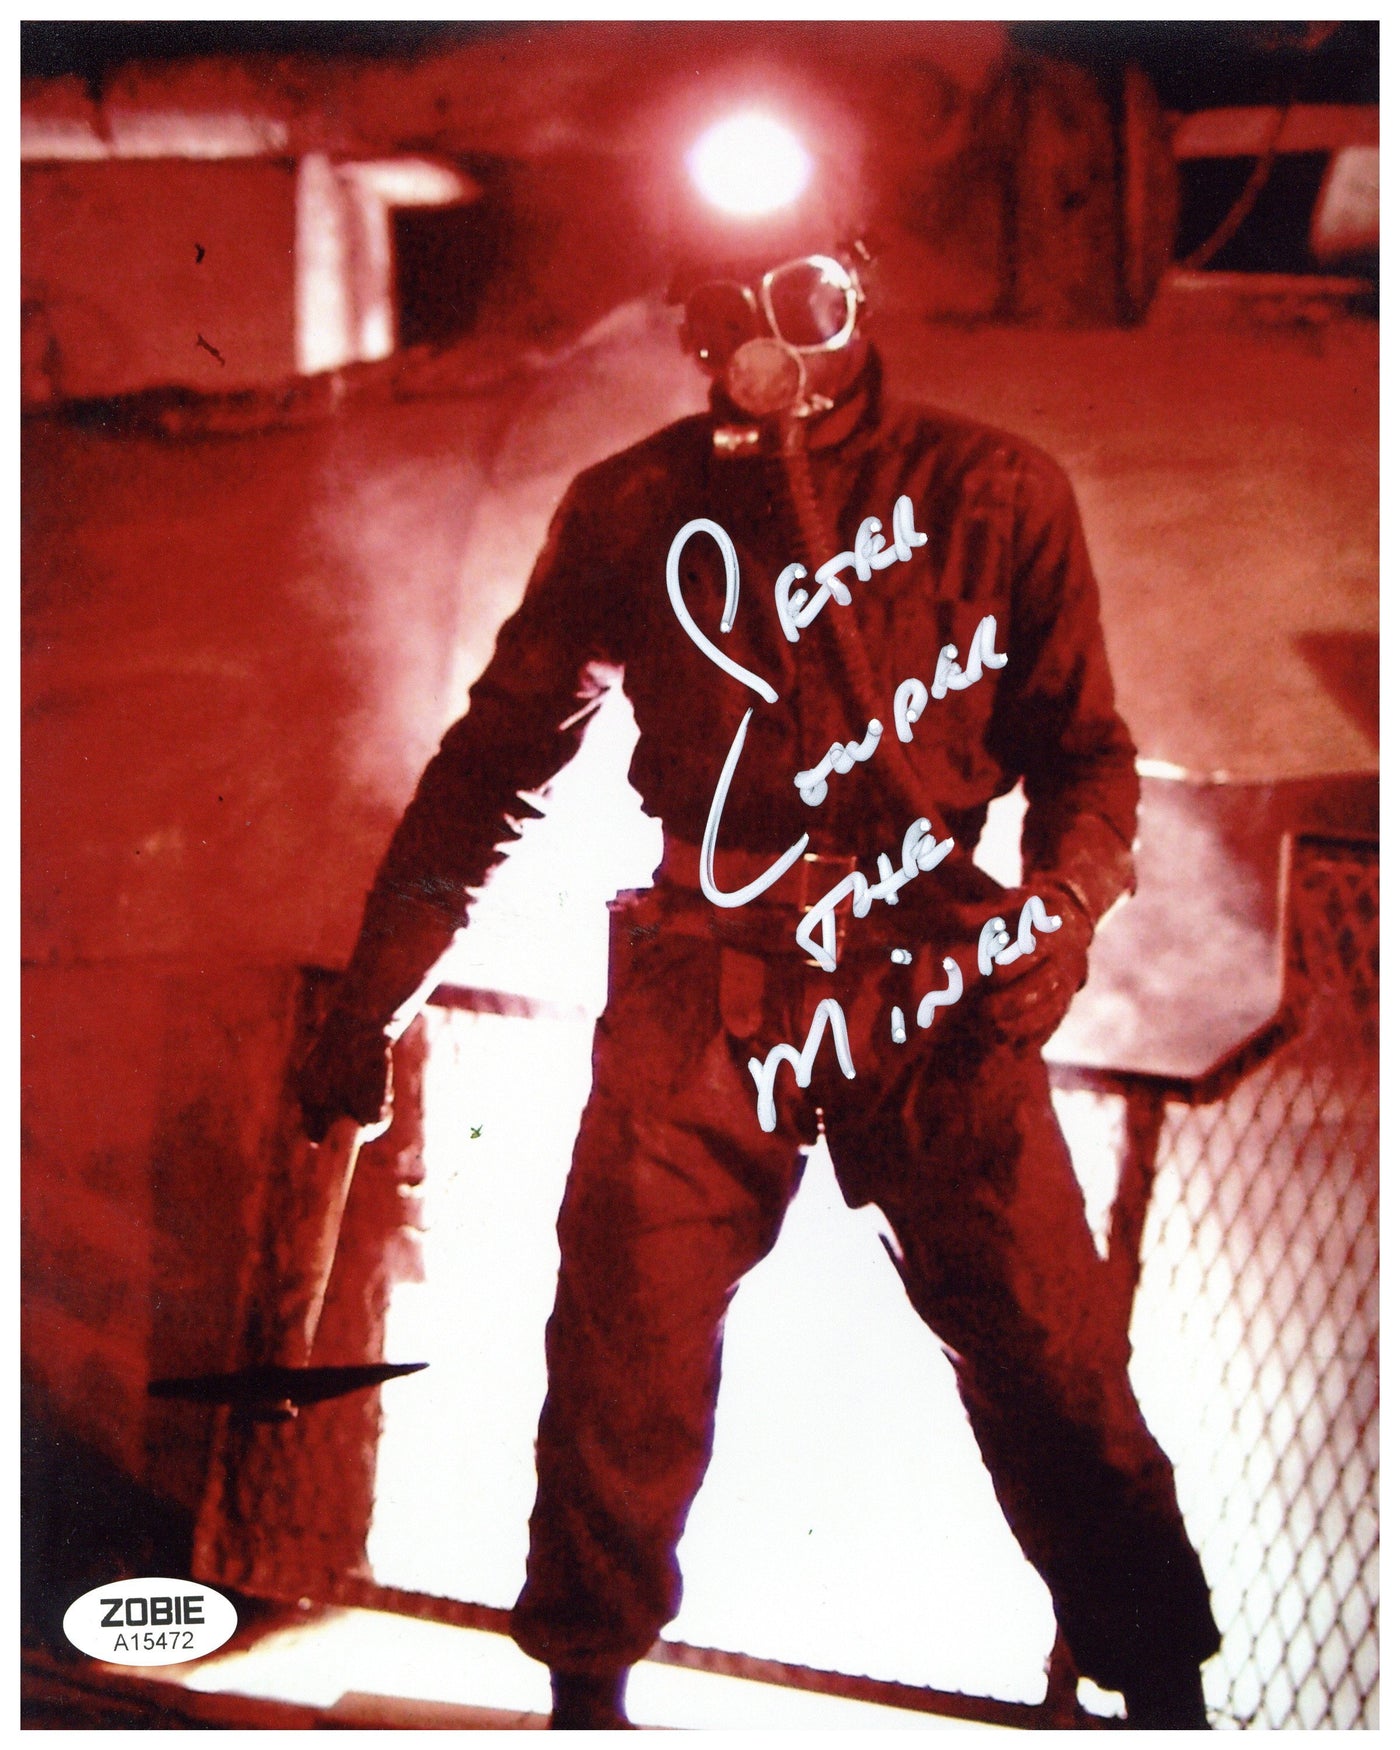 Peter Cowper Signed 8x10 Photo My Bloody Valentine The Miner Autographed JSA COA 5